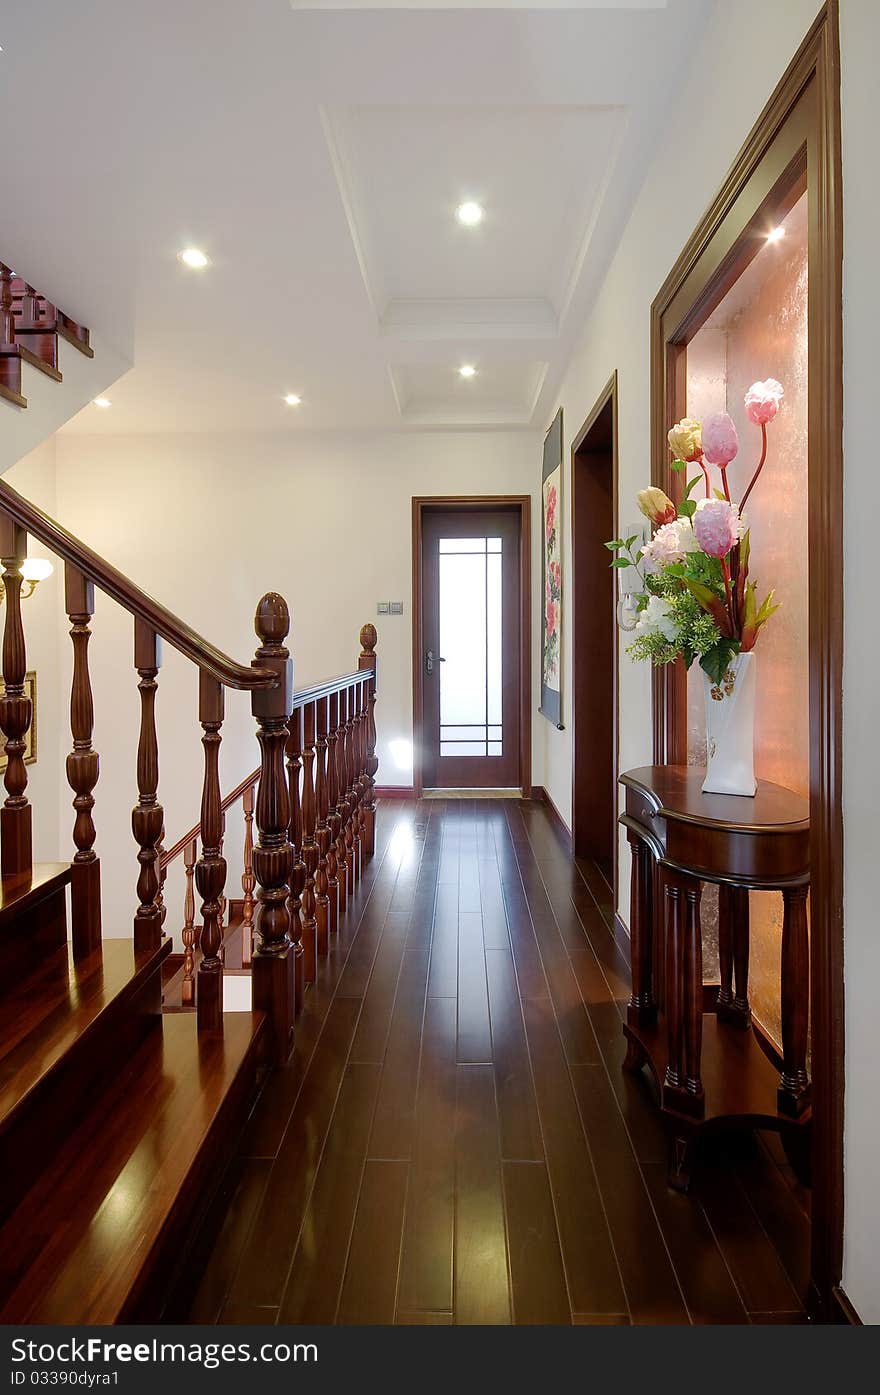 Stairs in a chinese-style home